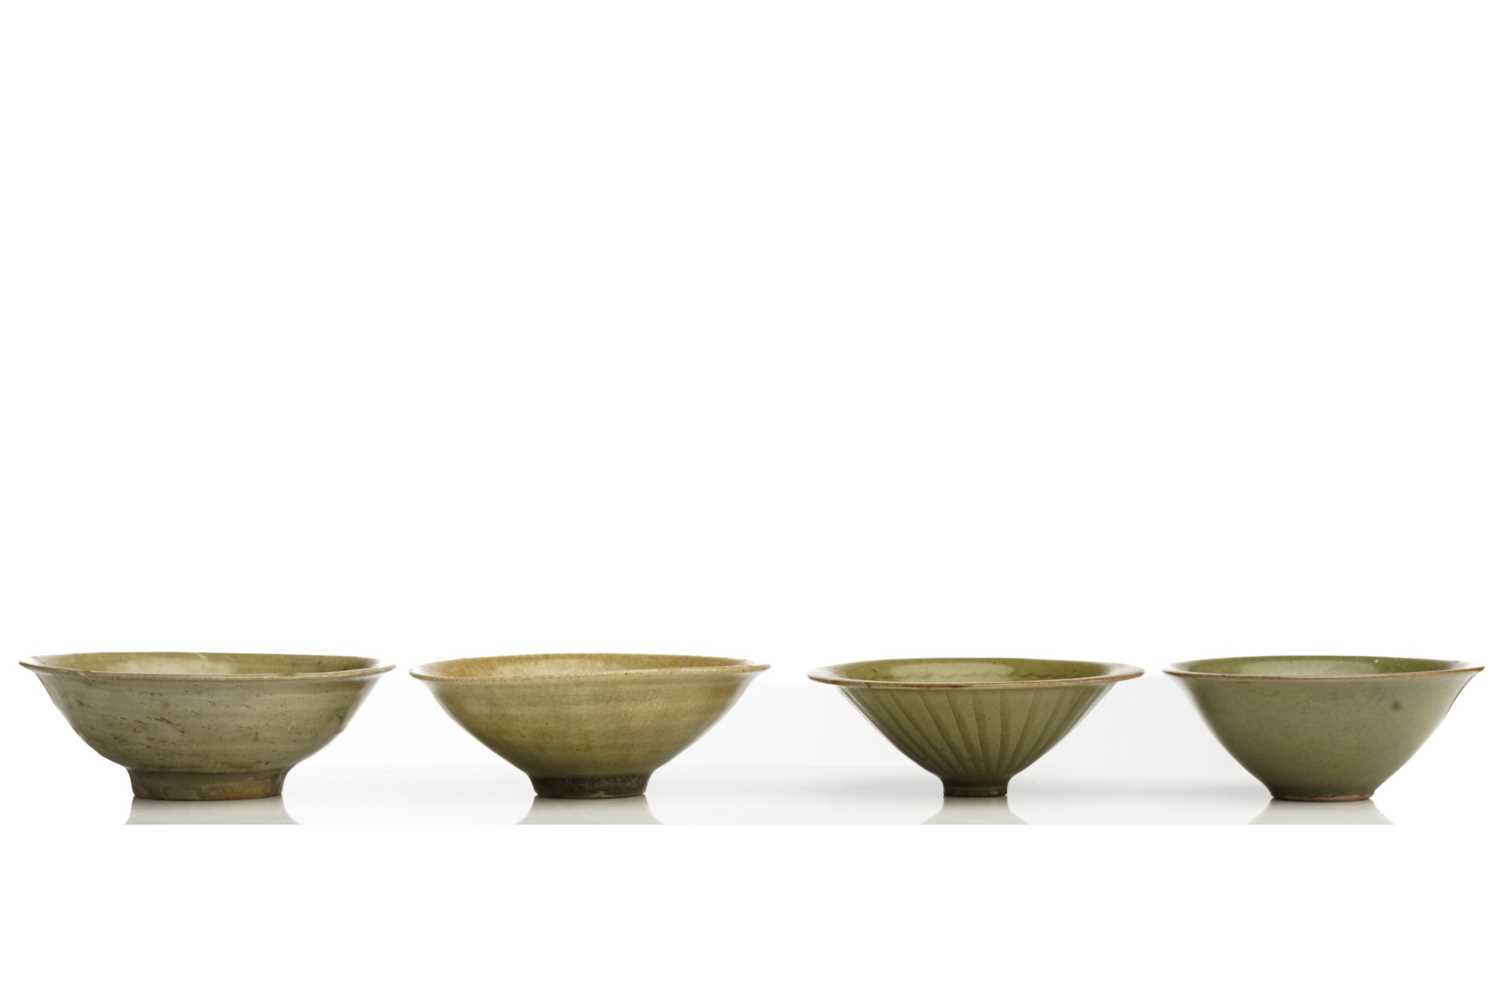 A Chinese Longquan celadon bowl, Song - Yuan dynasty, of shallow conical form, with flower head